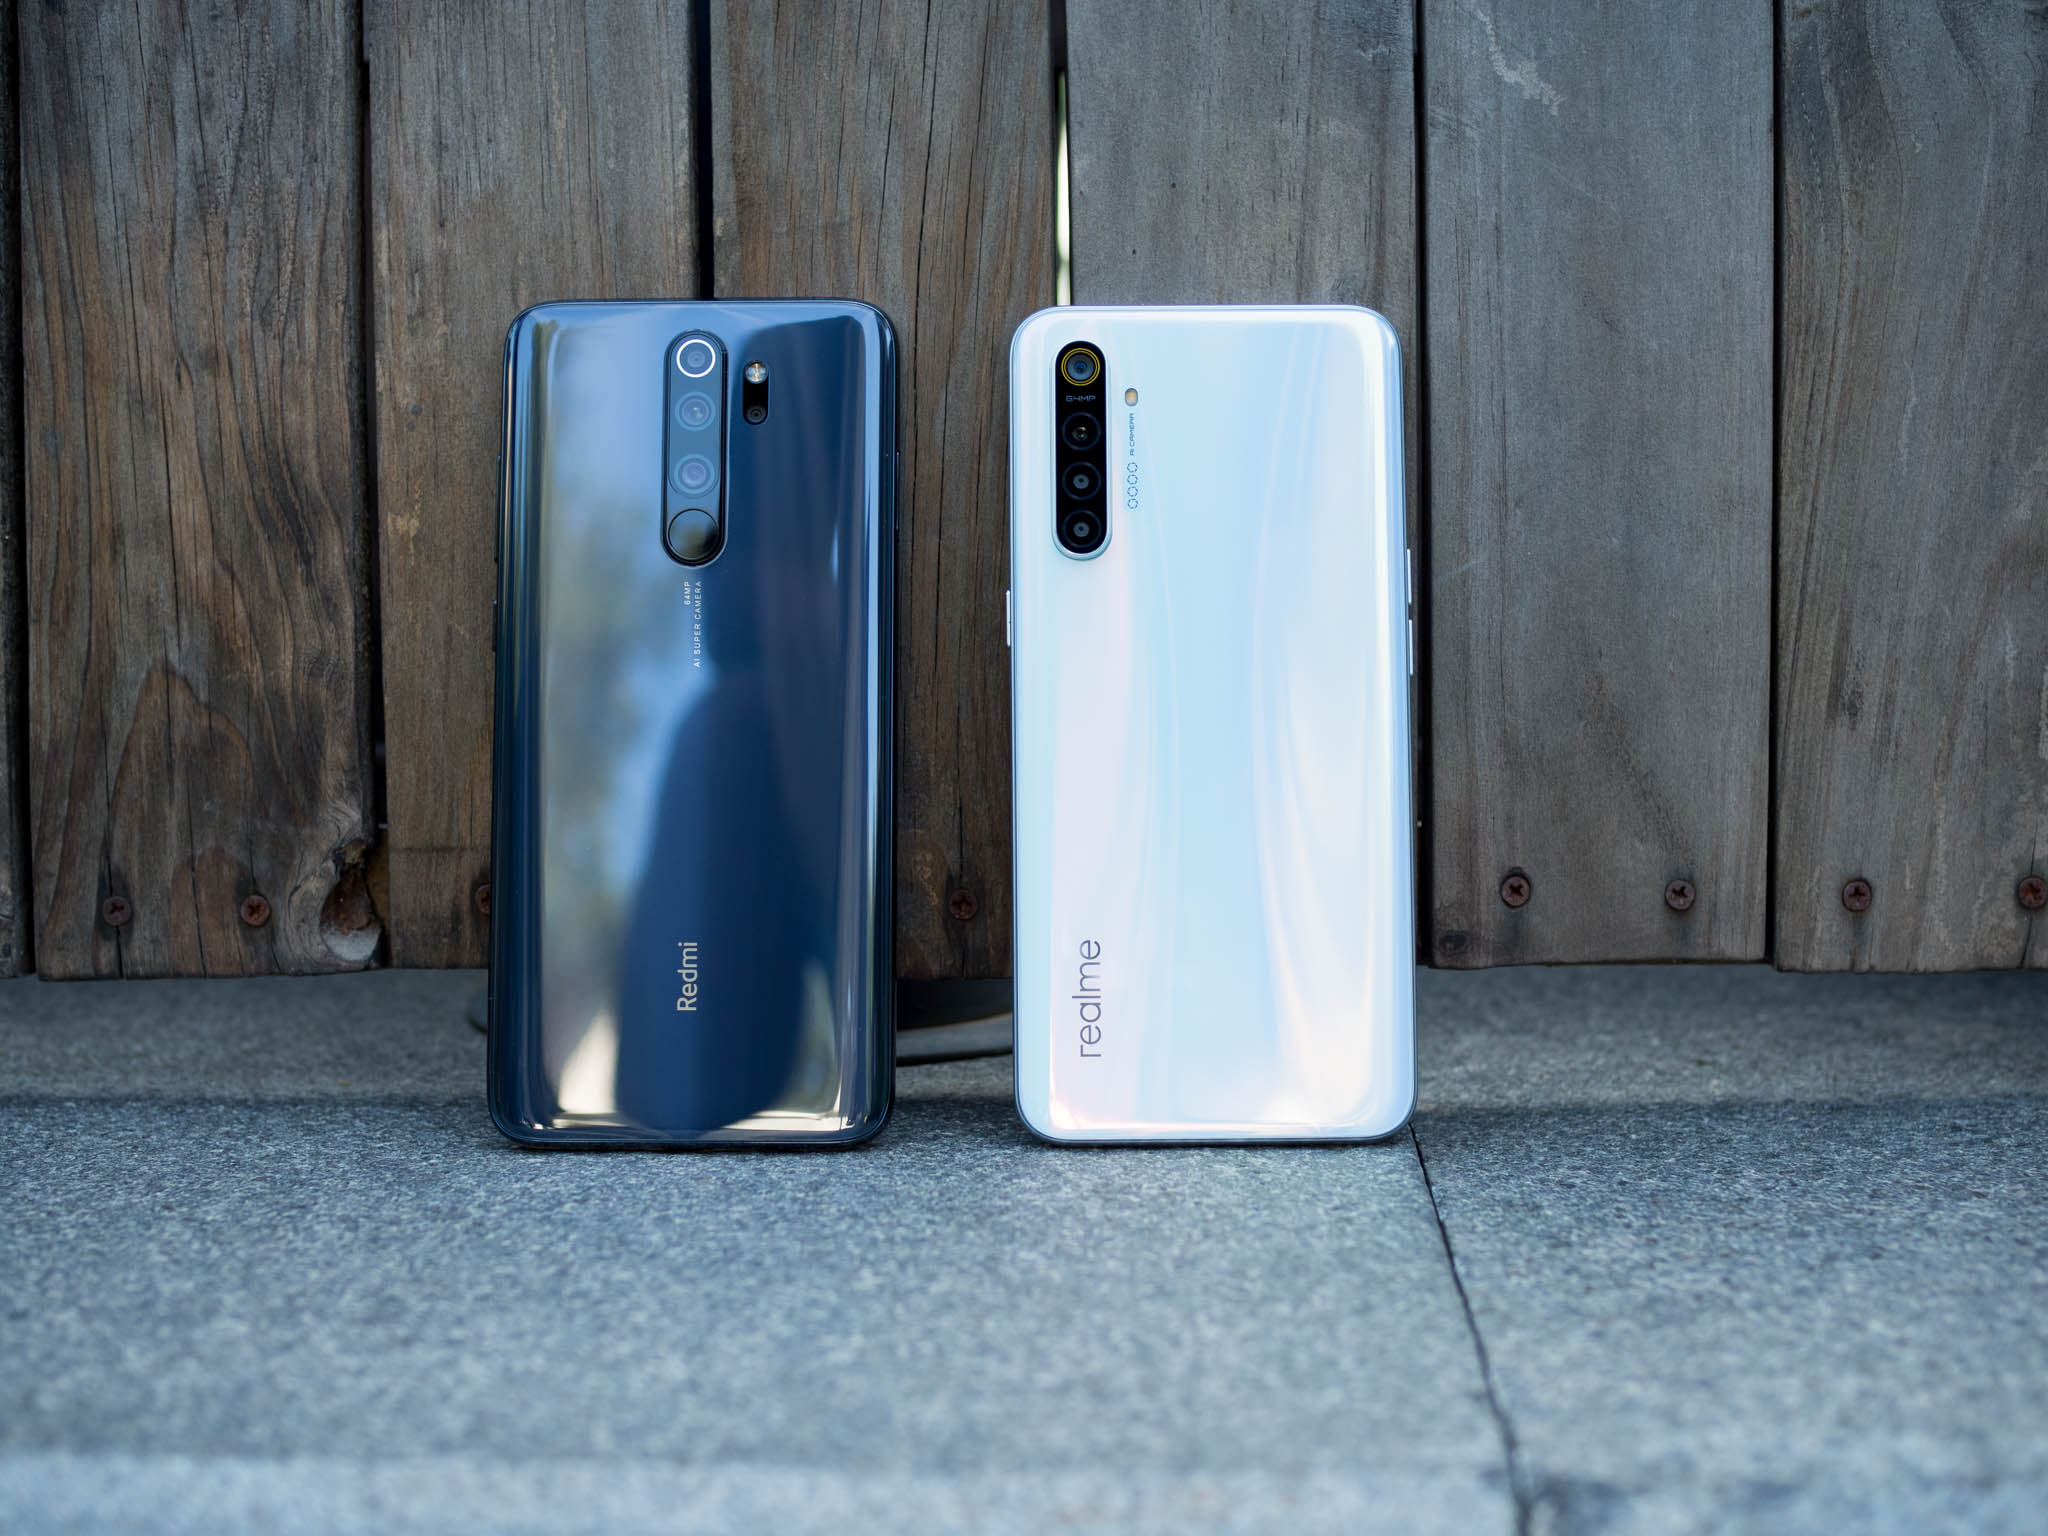 realme-or-redmi-which-is-better